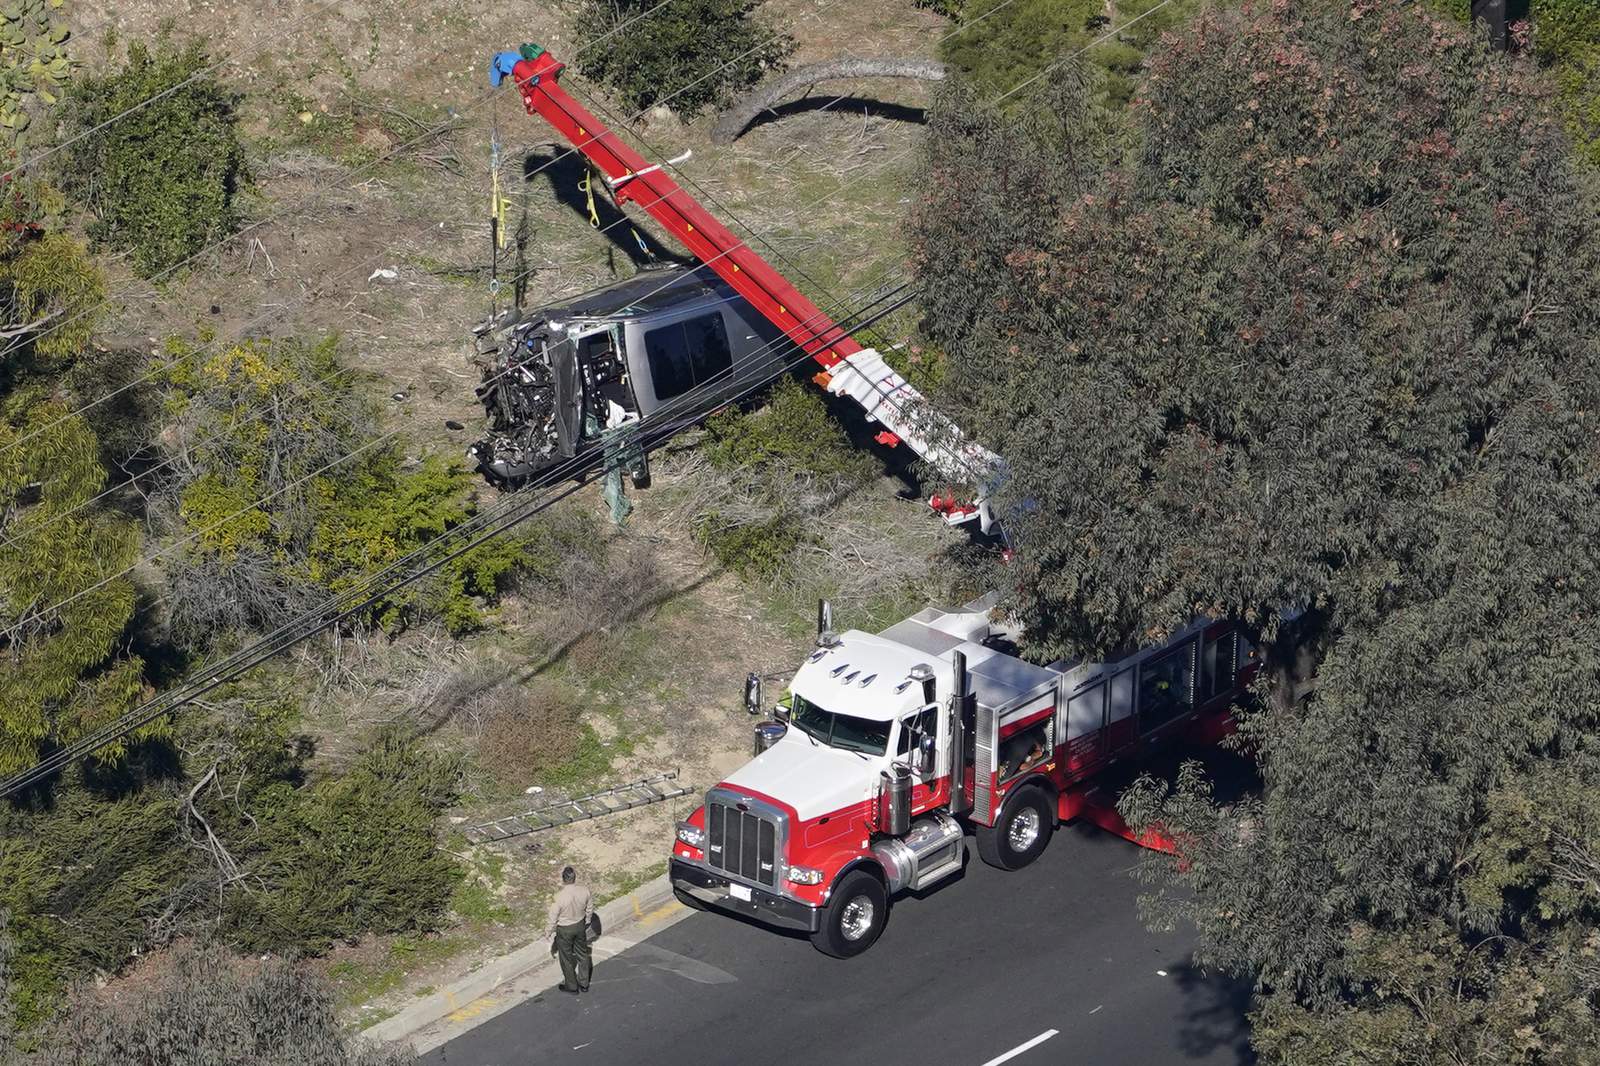 Tiger Woods suffers serious leg injuries in crash on steep LA-area road